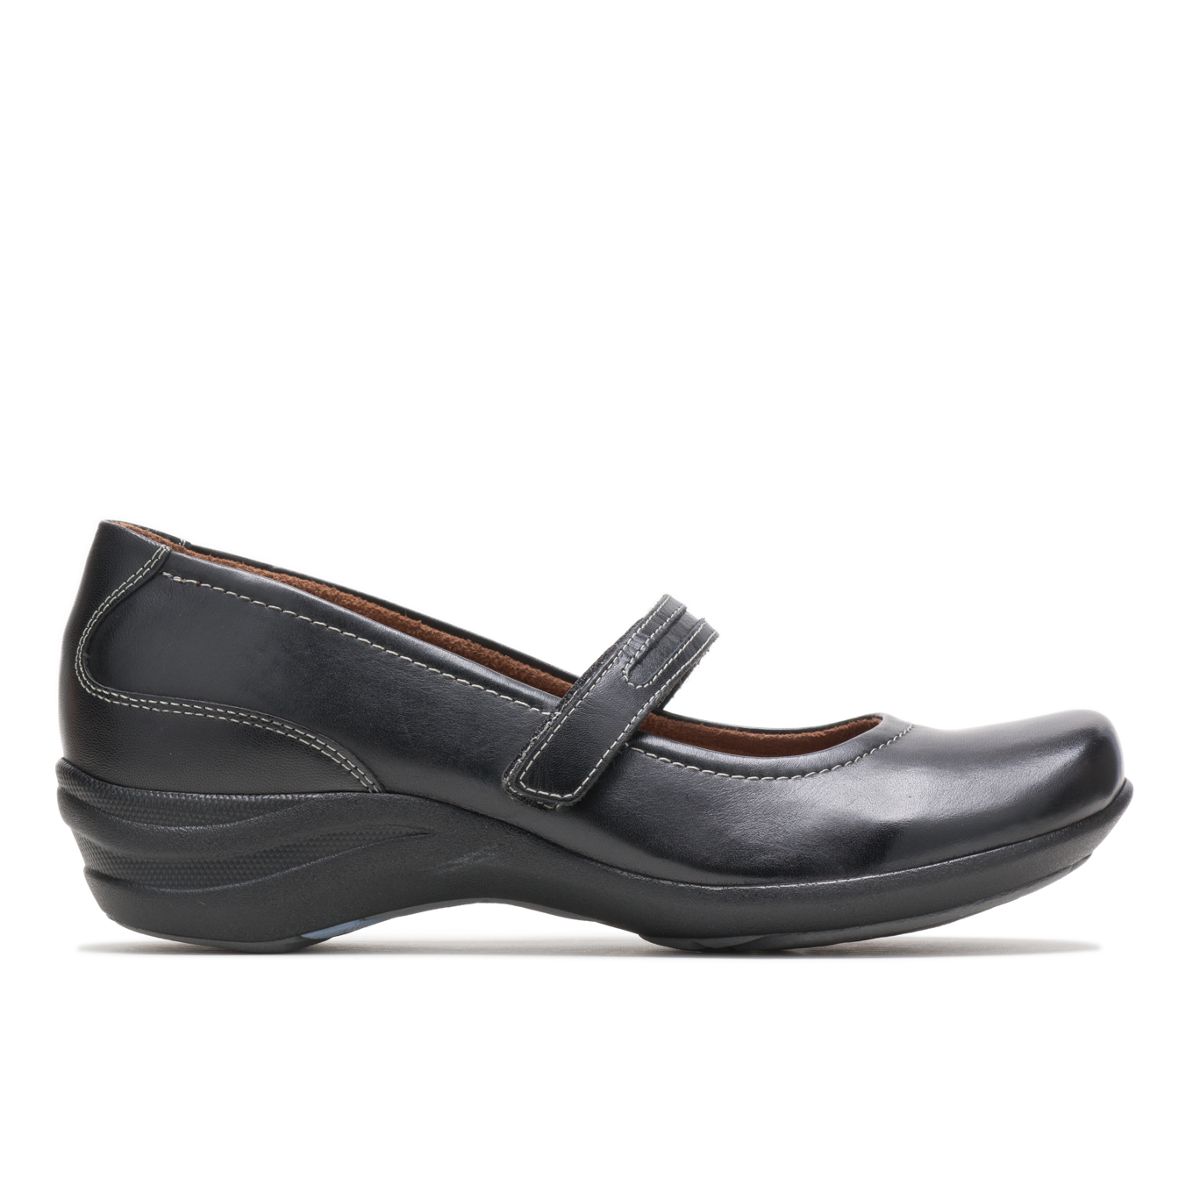 hush puppies loafers womens